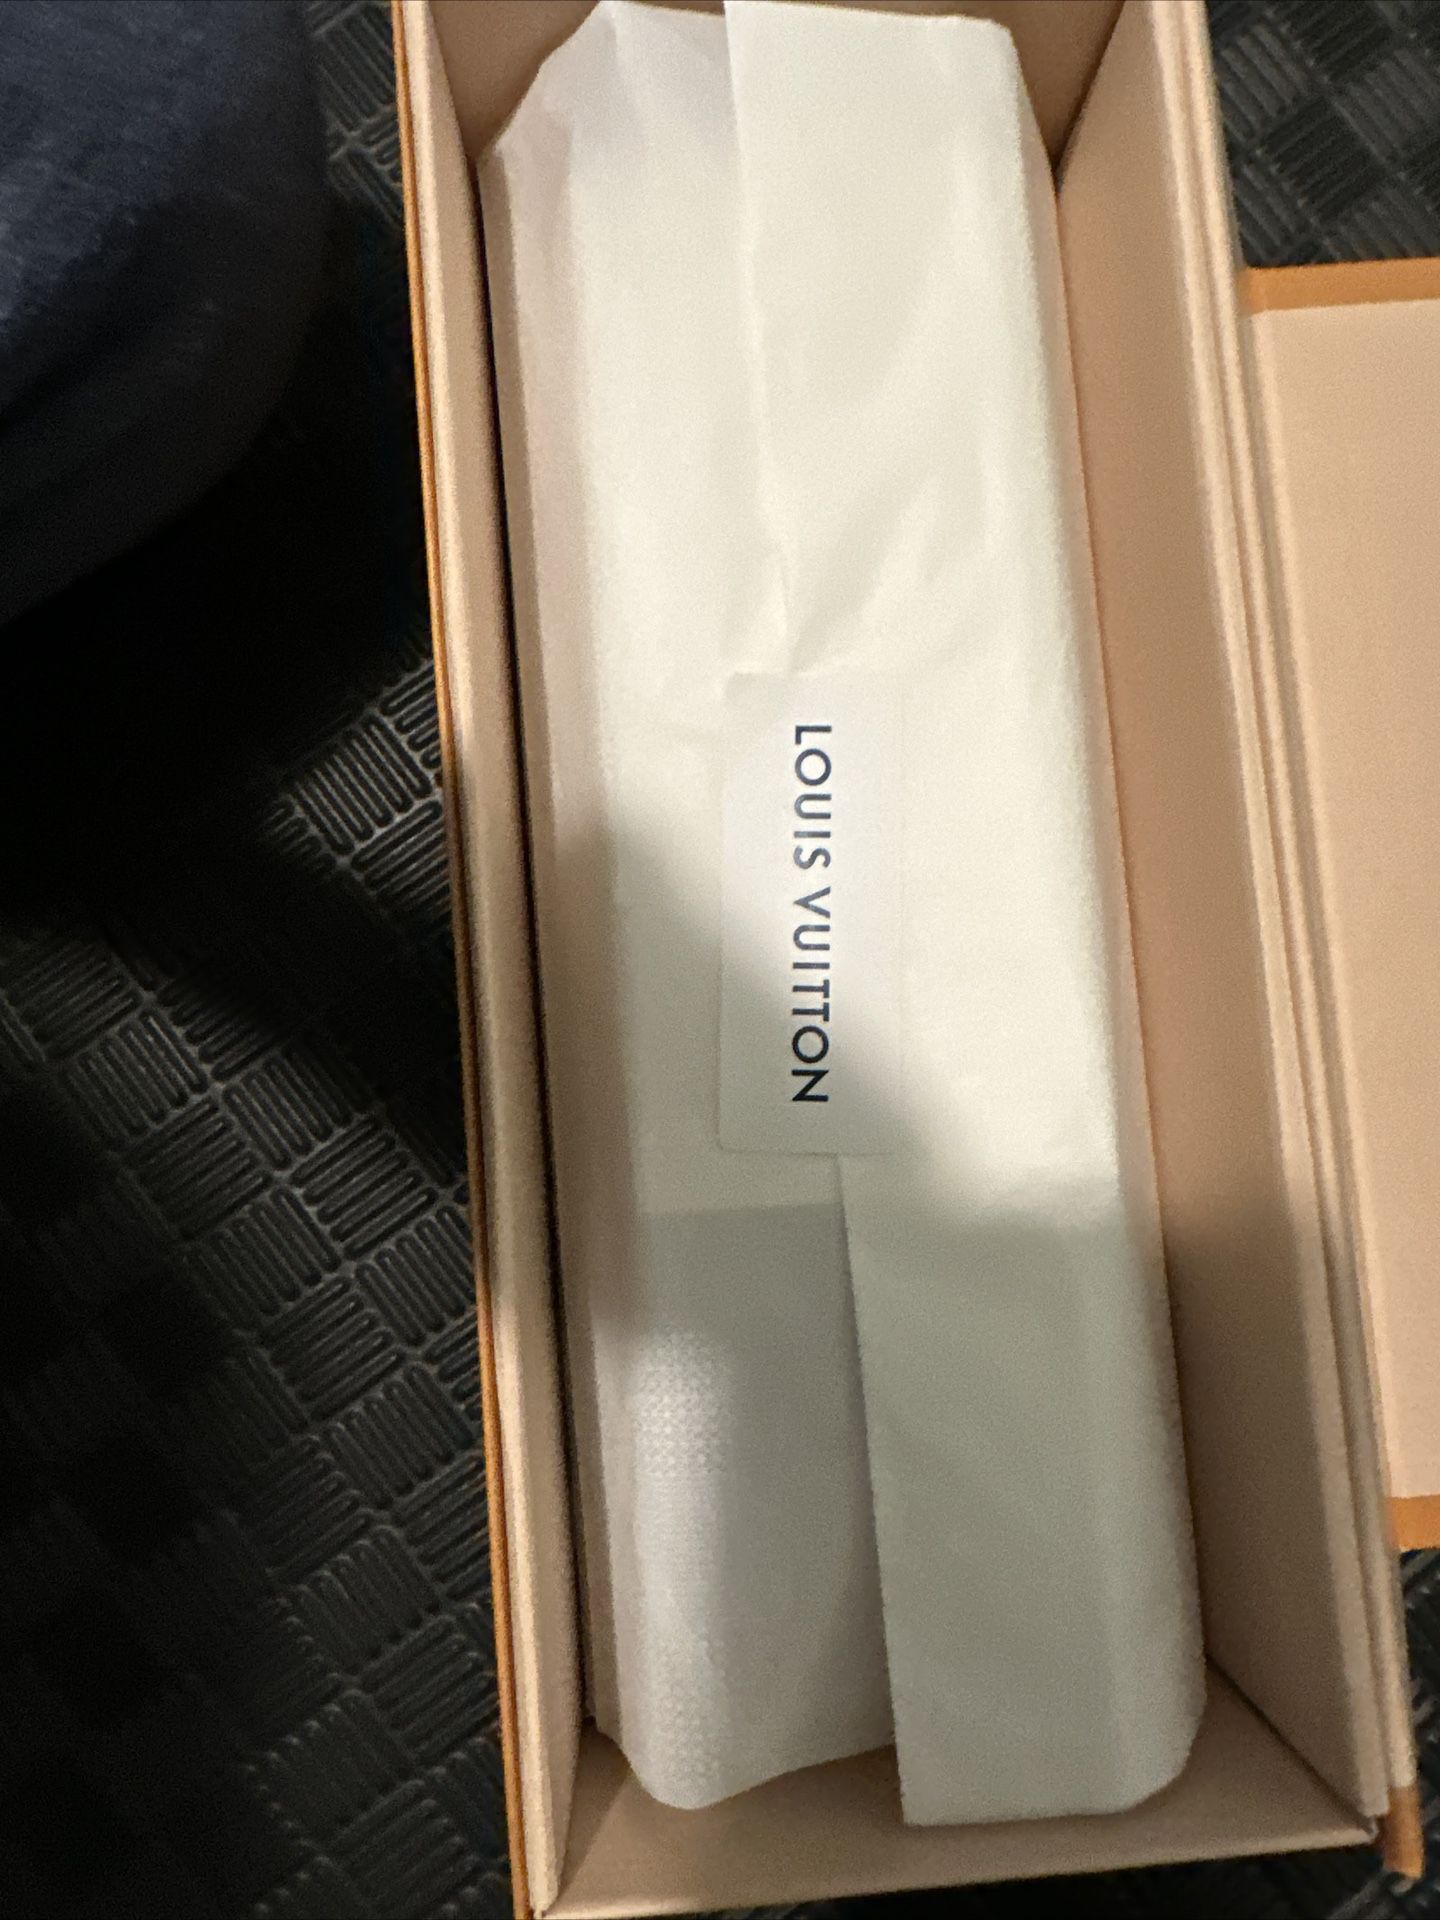 Louis Vuitton Apogee Perfume for Sale in Clackamas, OR - OfferUp